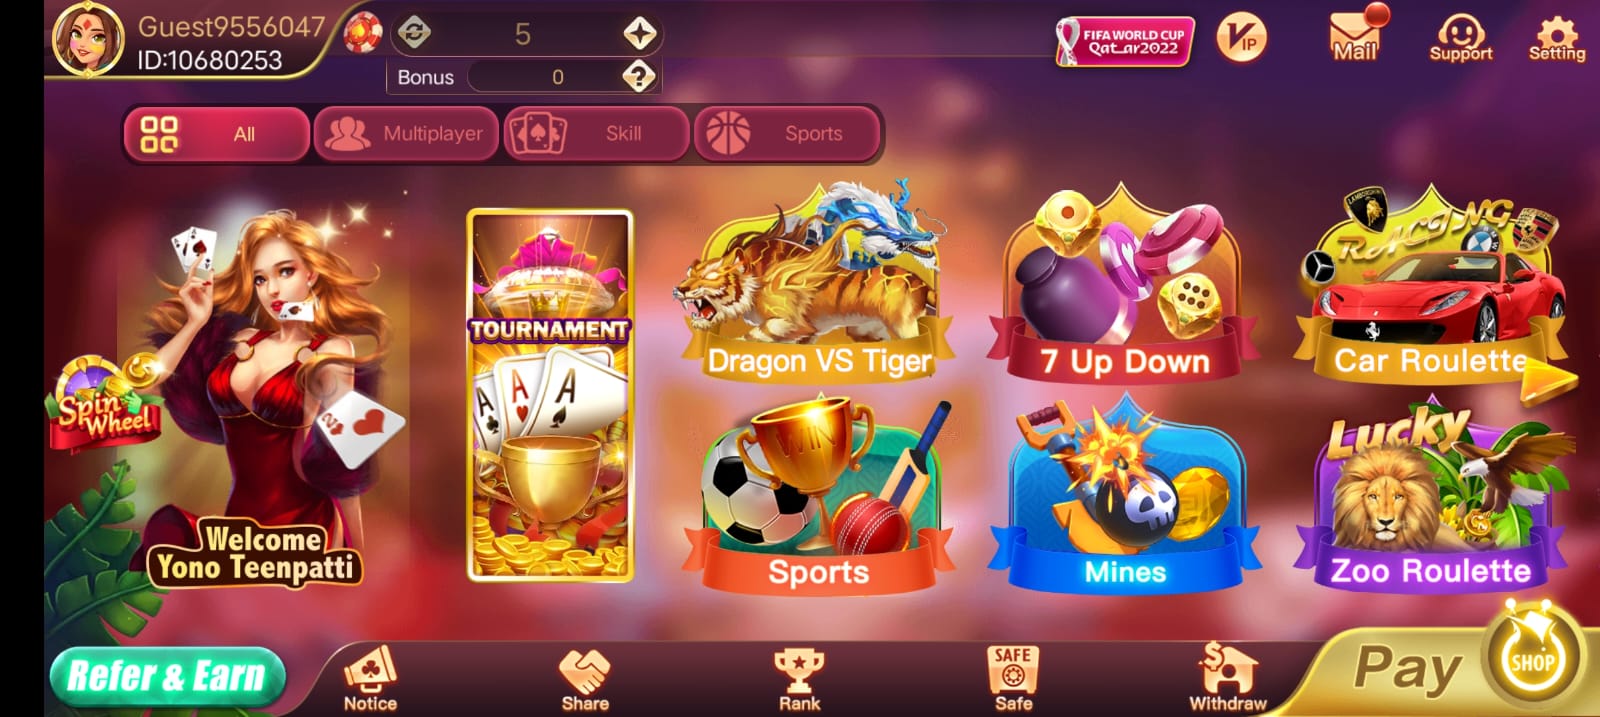 Available Games On Rummy Noble App